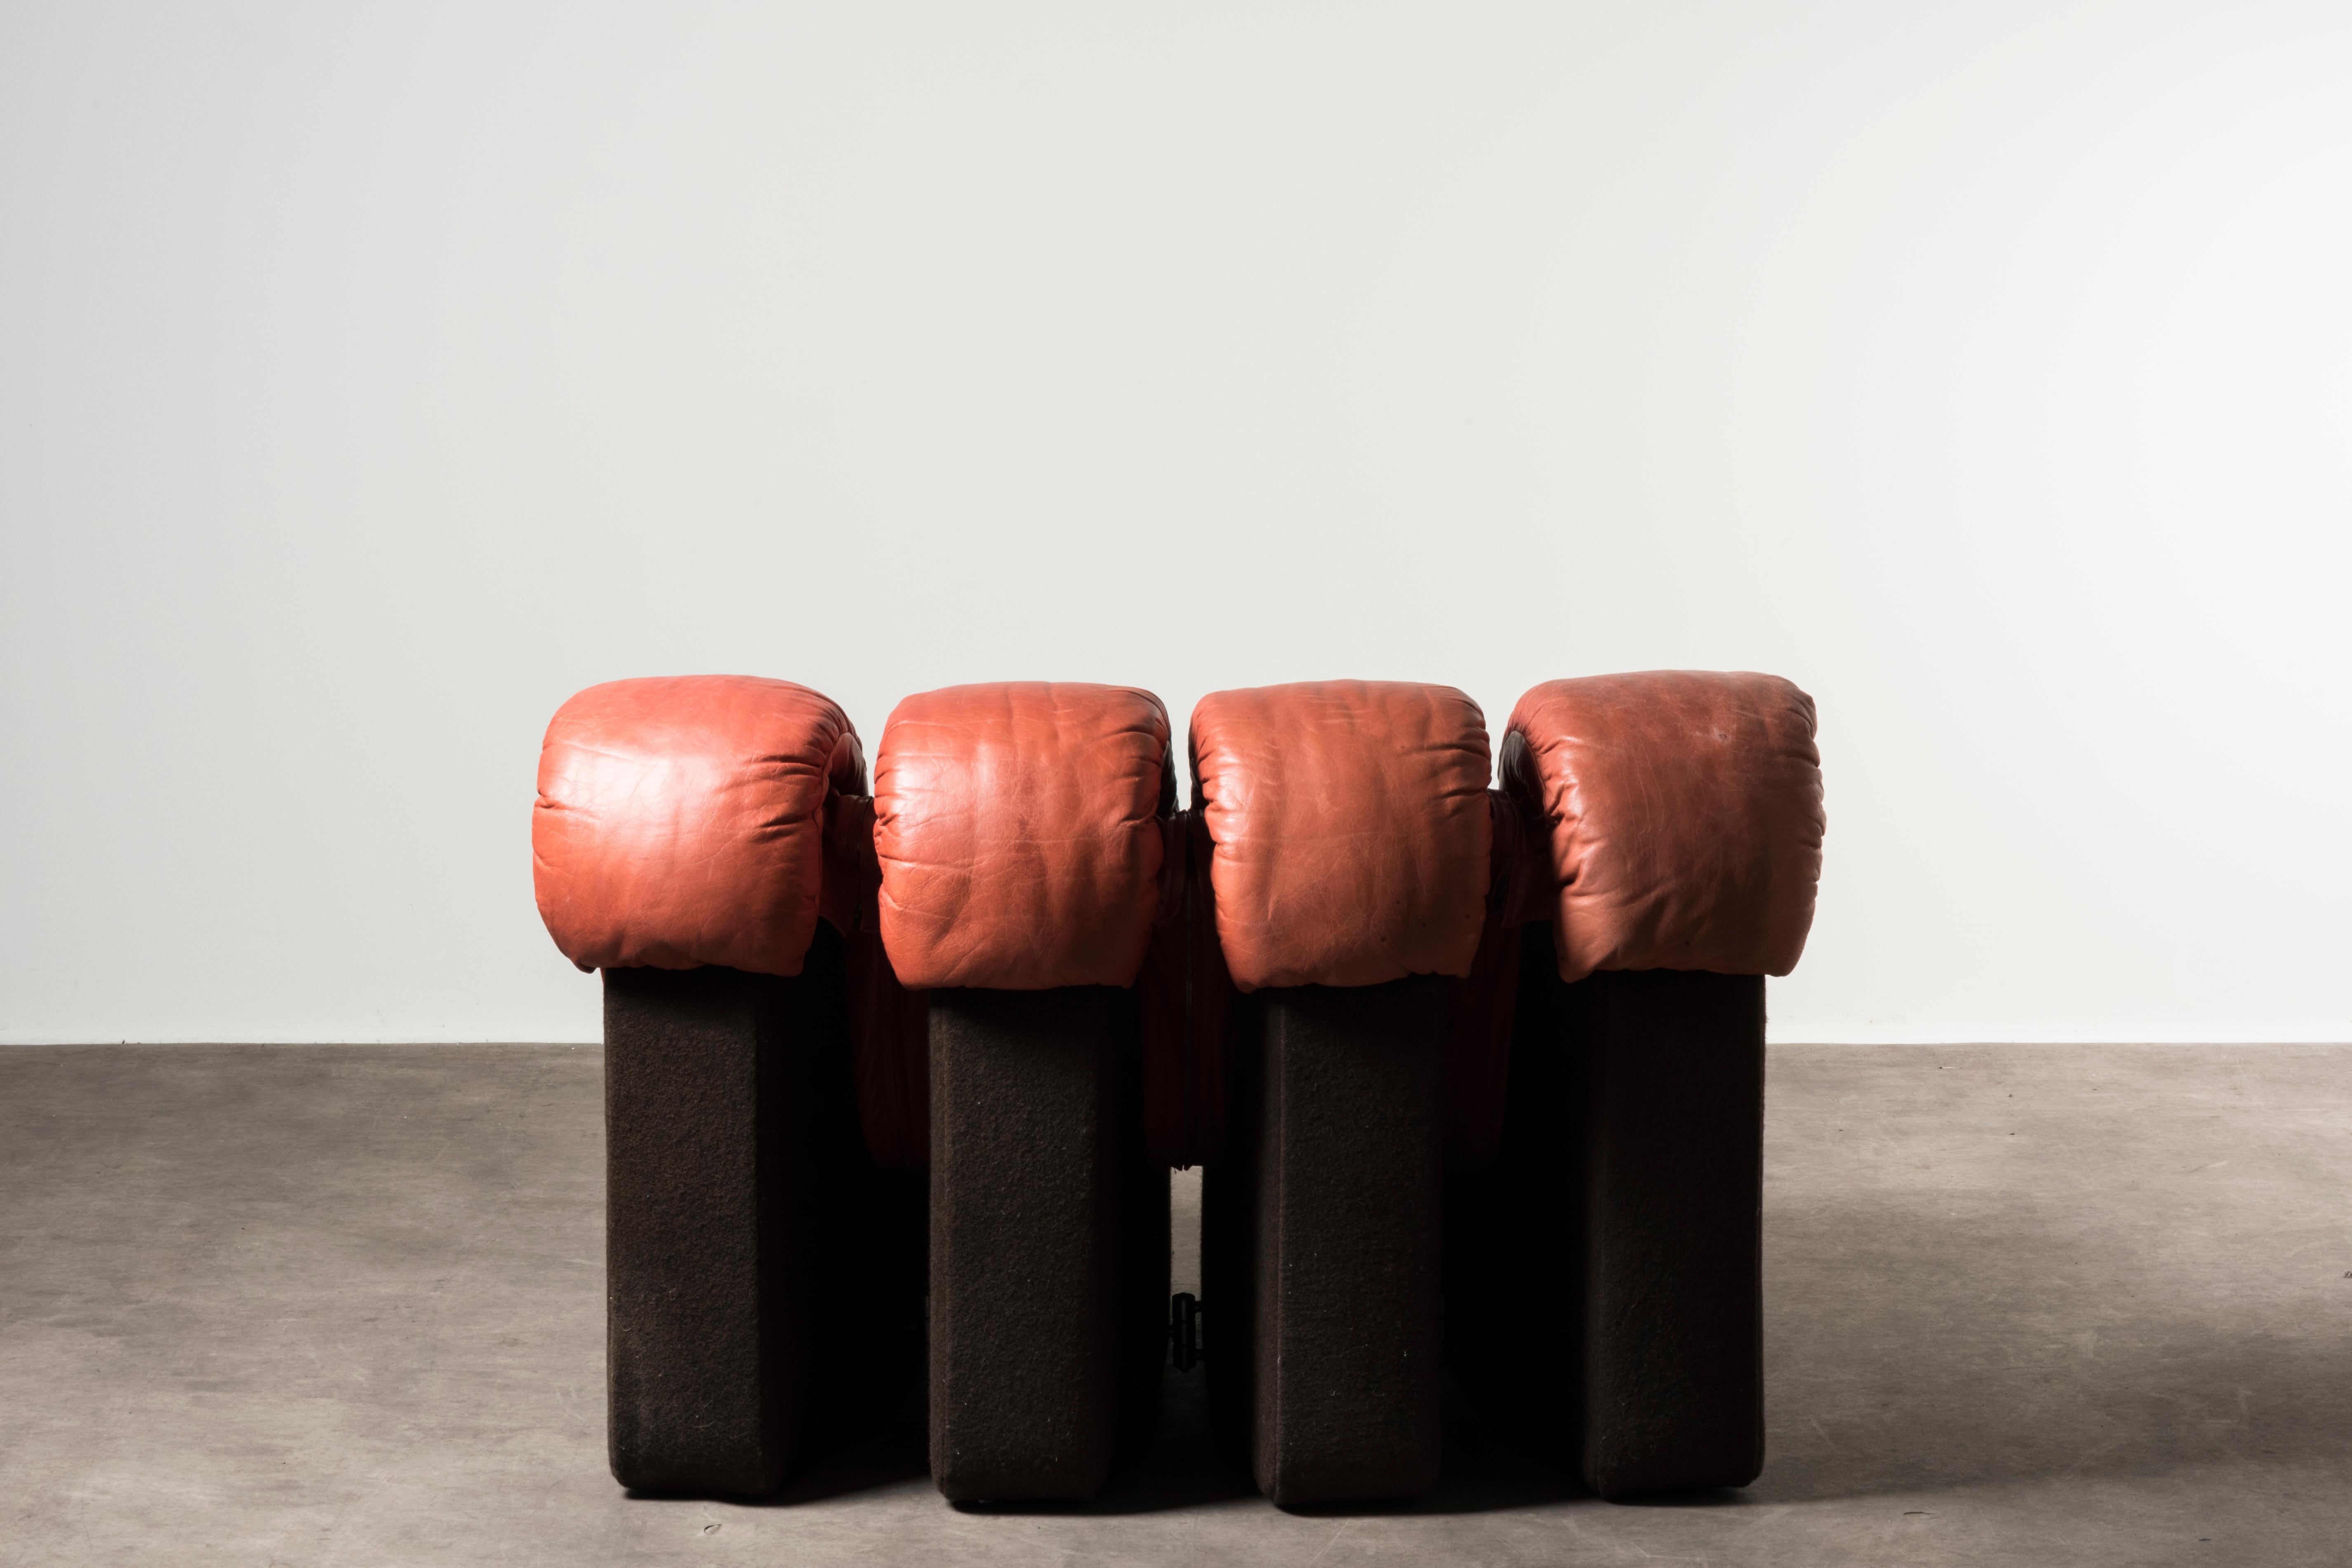 Large modular sofa (24 modules) by Ueli Berger, Eleonore Peduzzi Riva e Klaus Vogt. Italy, 1972. Manufactured by De Sede. Wood, leather. Measures: 100 x 600 x H 73 cm, each module: 100 x 25 x H 73 cm 39.3 x 236.2 x H 28.7 in - each module: 39.3 x